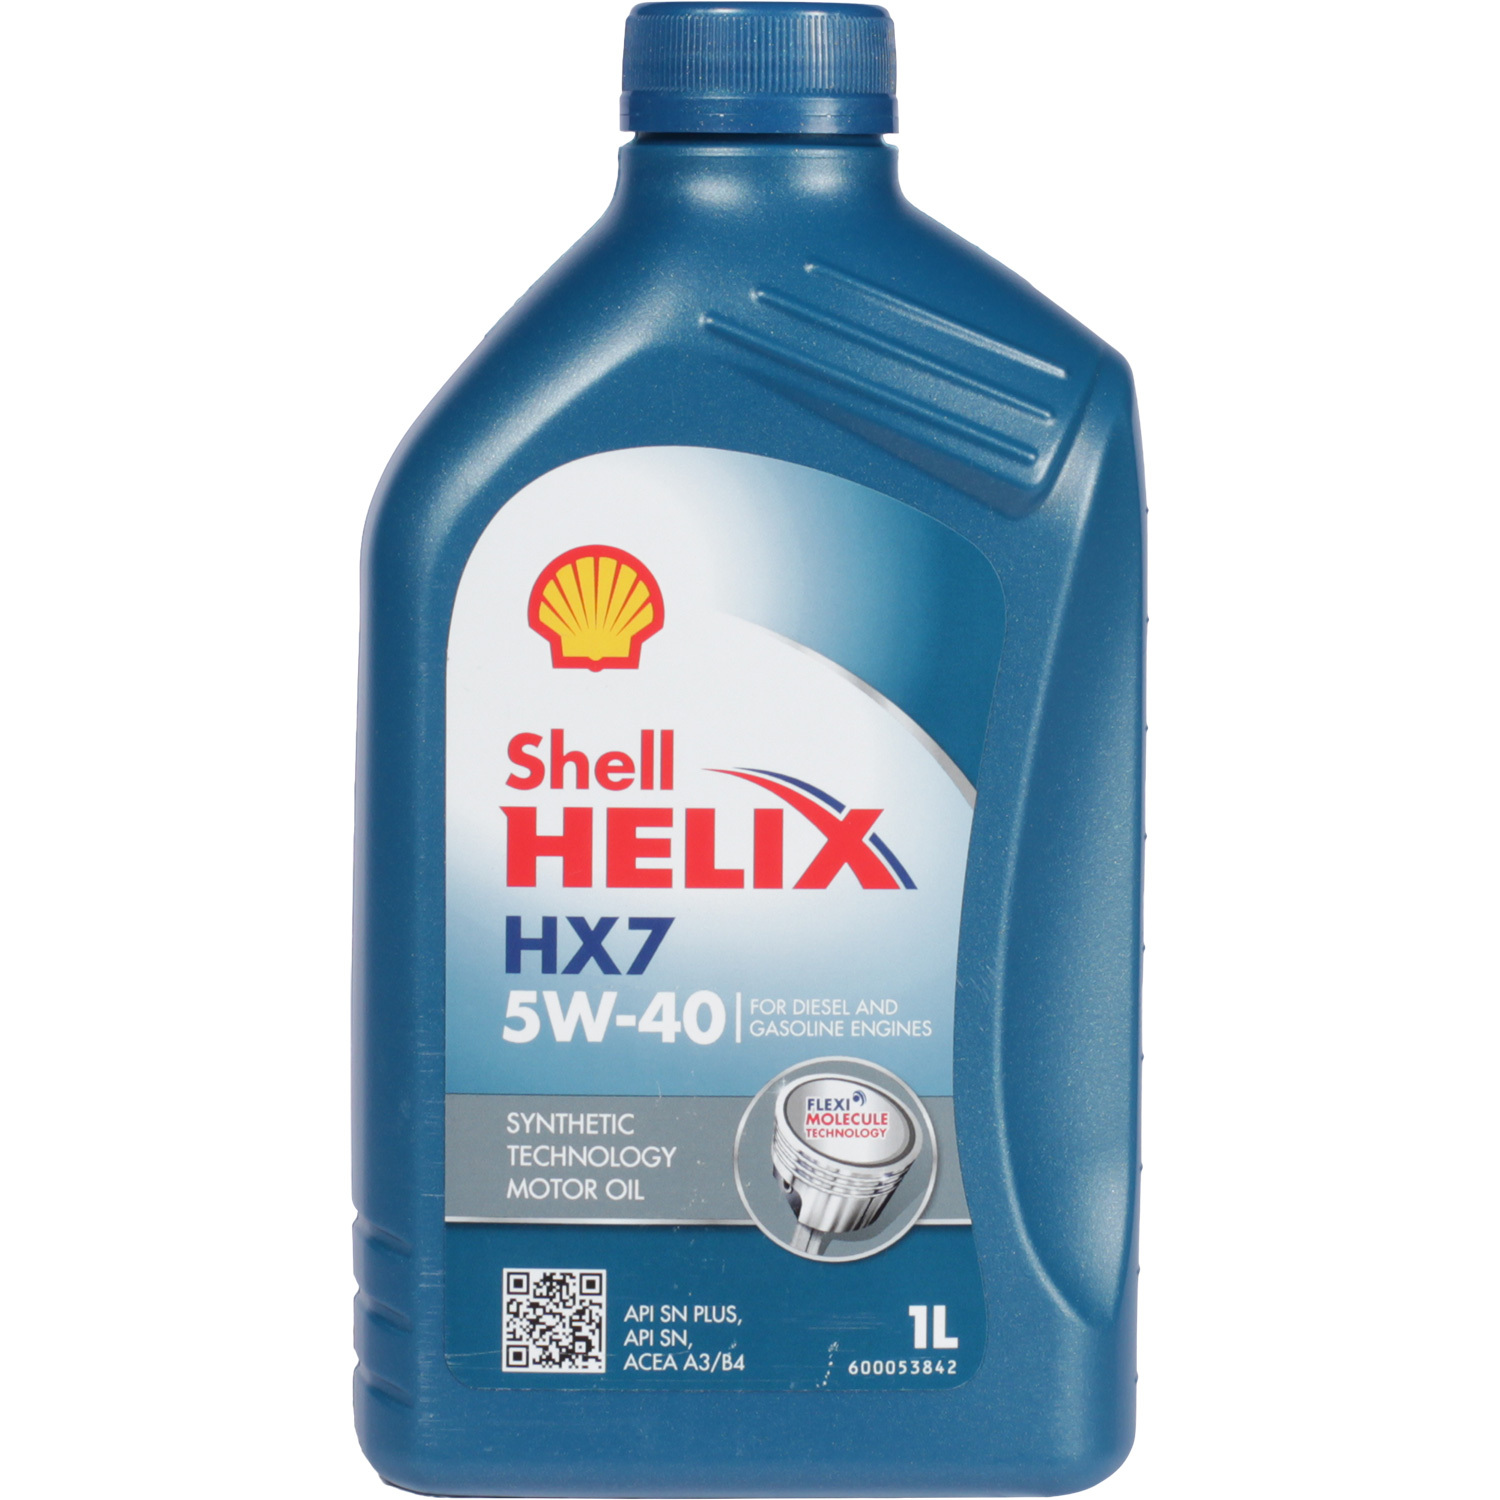 Shell Моторное масло Shell Helix HX7 5W-40, 1 л shell моторное масло shell helix hx8 5w 30 1 л